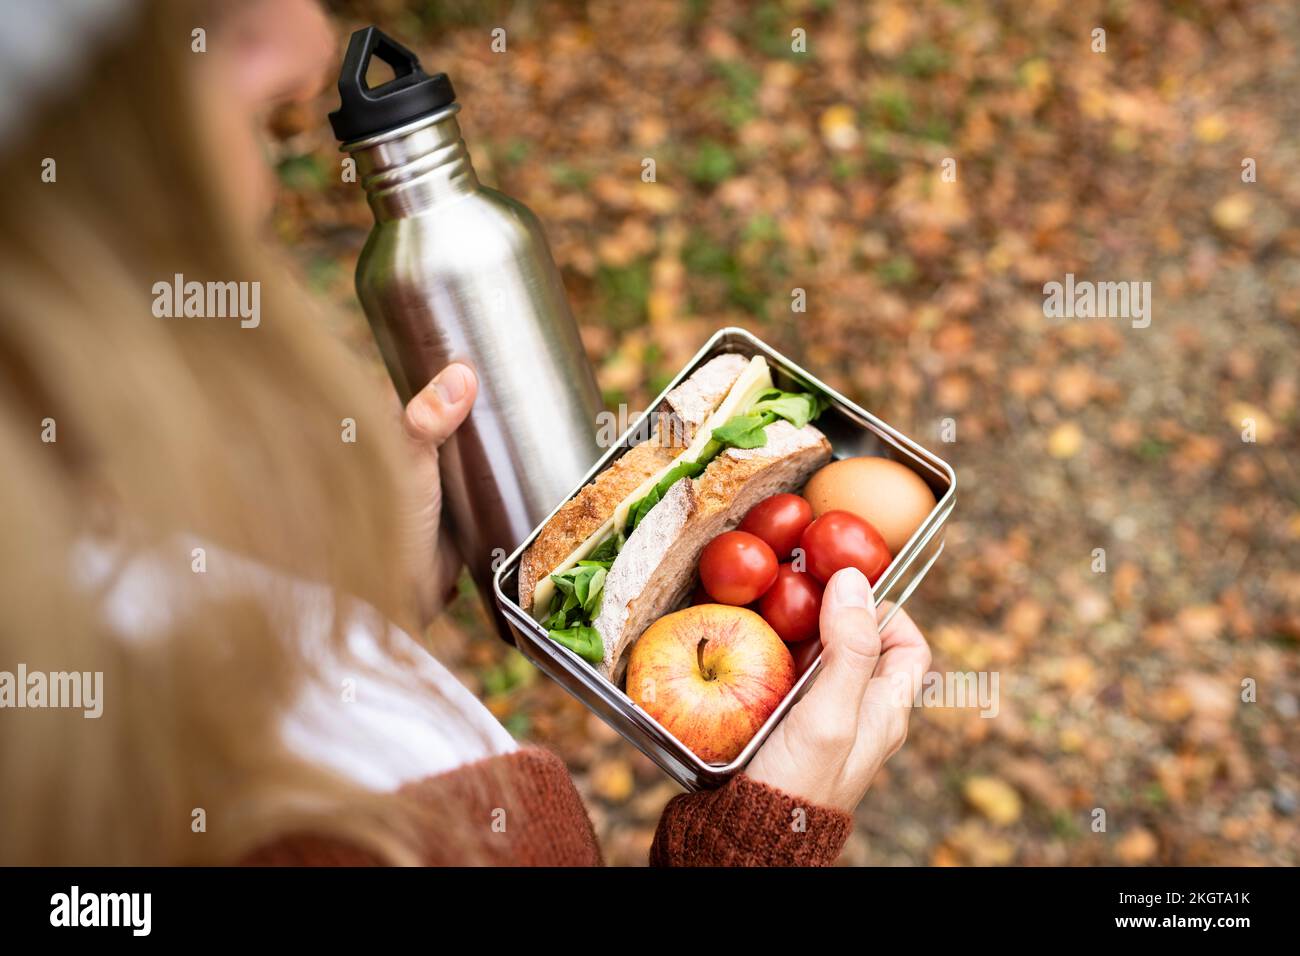 Breakfast In The Park, Thermos, Sandwich And Cup Stock Photo, Picture and  Royalty Free Image. Image 29317758.